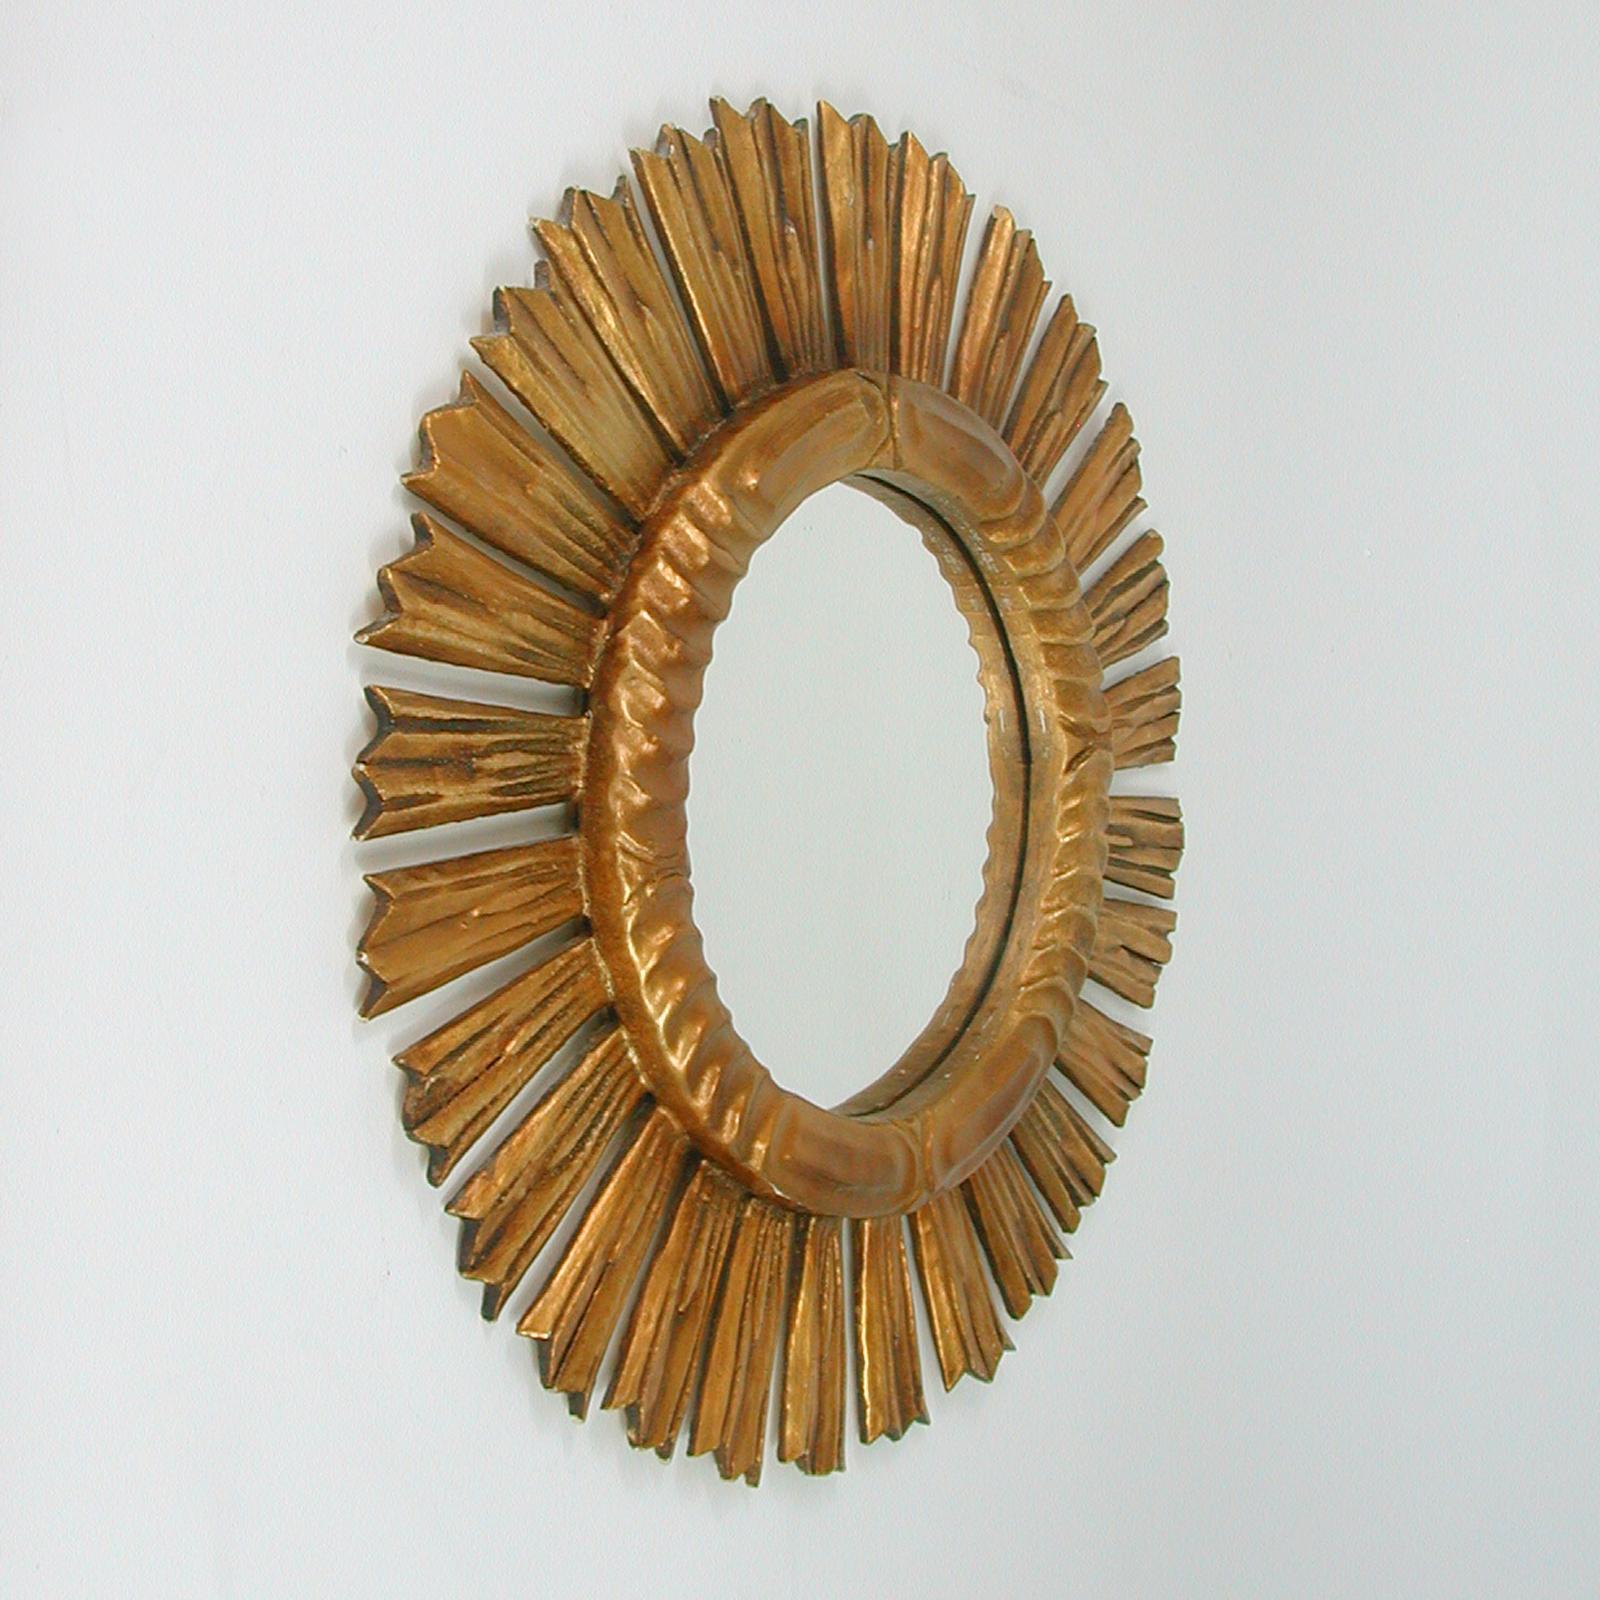 Spanish Sunburst Carved Giltwood Mirror, 1940s to 1950s For Sale 5